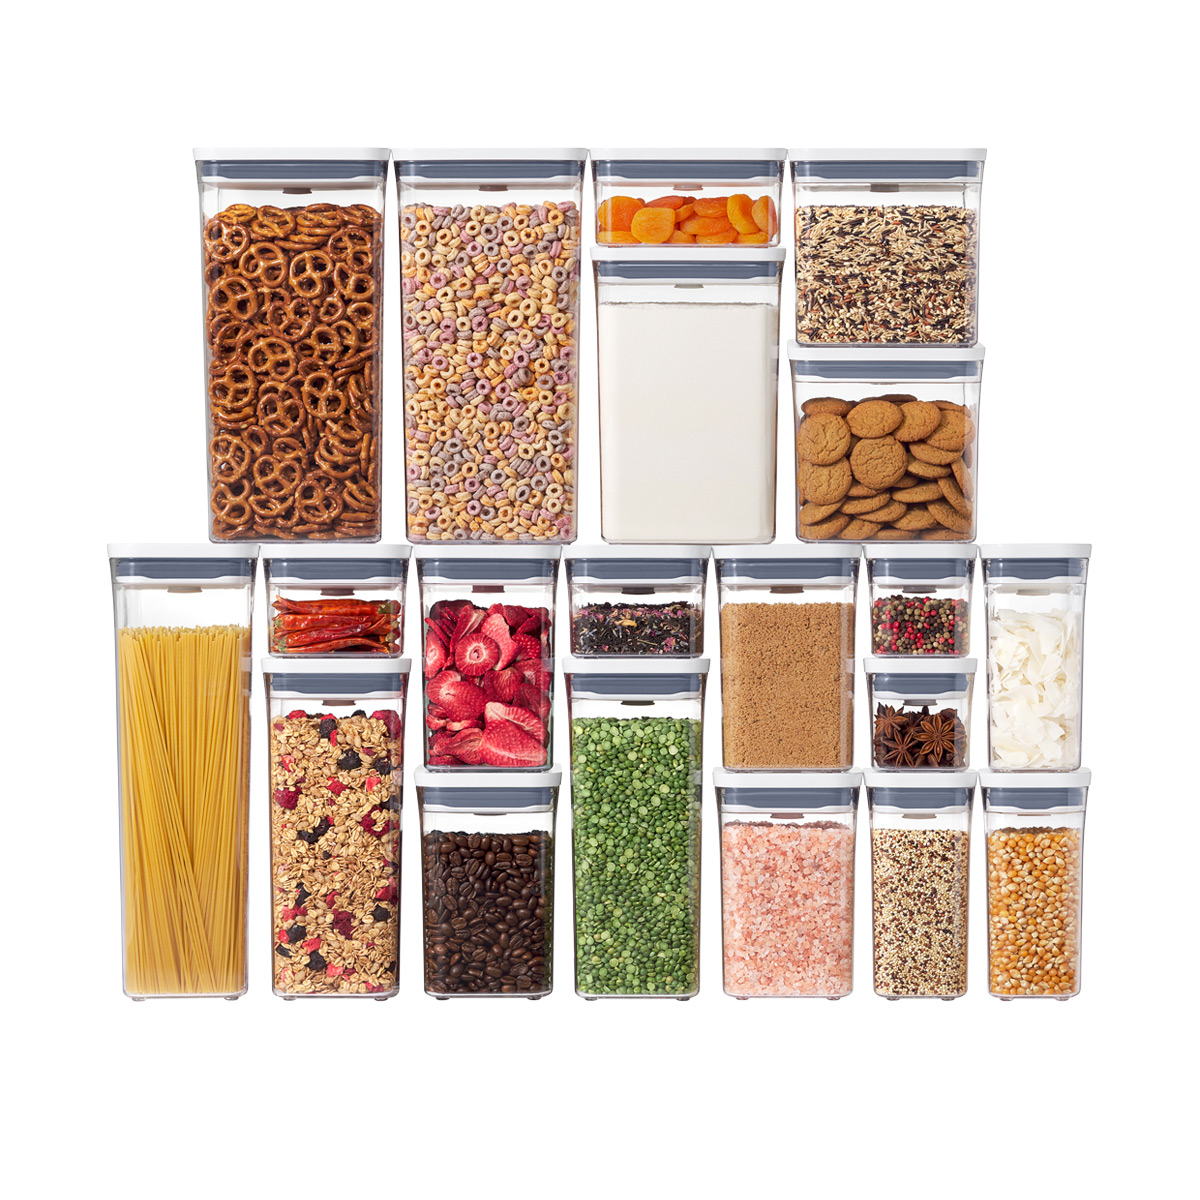 https://www.containerstore.com/catalogimages/368918/10075022-OXO-20-Piece-POP-Container-.jpg